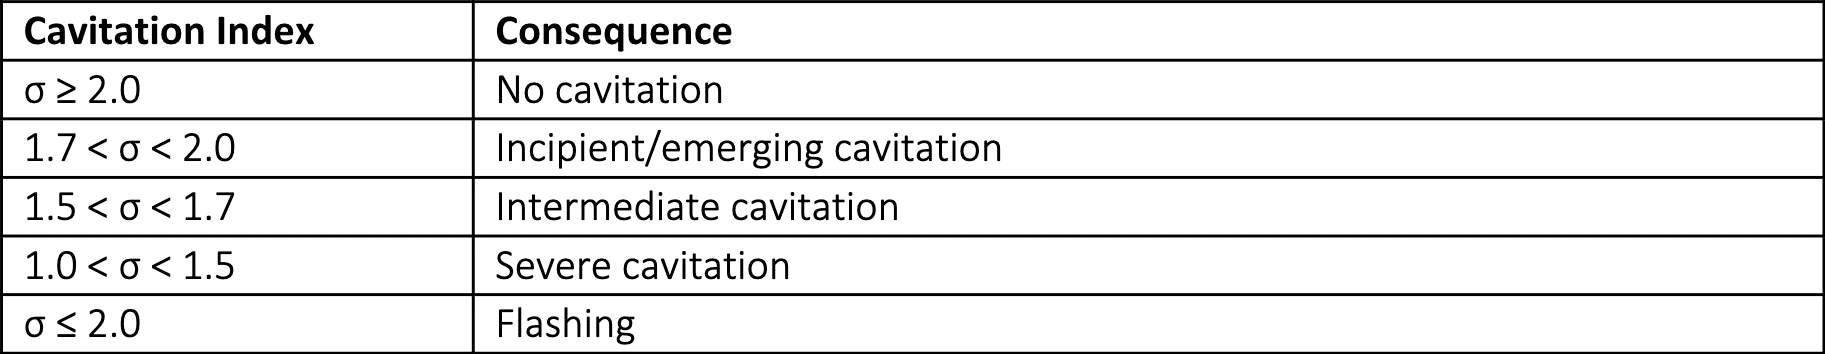 The image shows a table with two columns: "Cavitation Index" and "Consequence". The table categorizes different ranges of the cavitation index (σ) and describes the corresponding consequences as follows:

For σ ≥ 2.0: No cavitation
For 1.7 < σ < 2.0: Incipient/emerging cavitation
For 1.5 < σ < 1.7: Intermediate cavitation
For 1.0 < σ < 1.5: Severe cavitation
For σ ≤ 1.0: Flashing